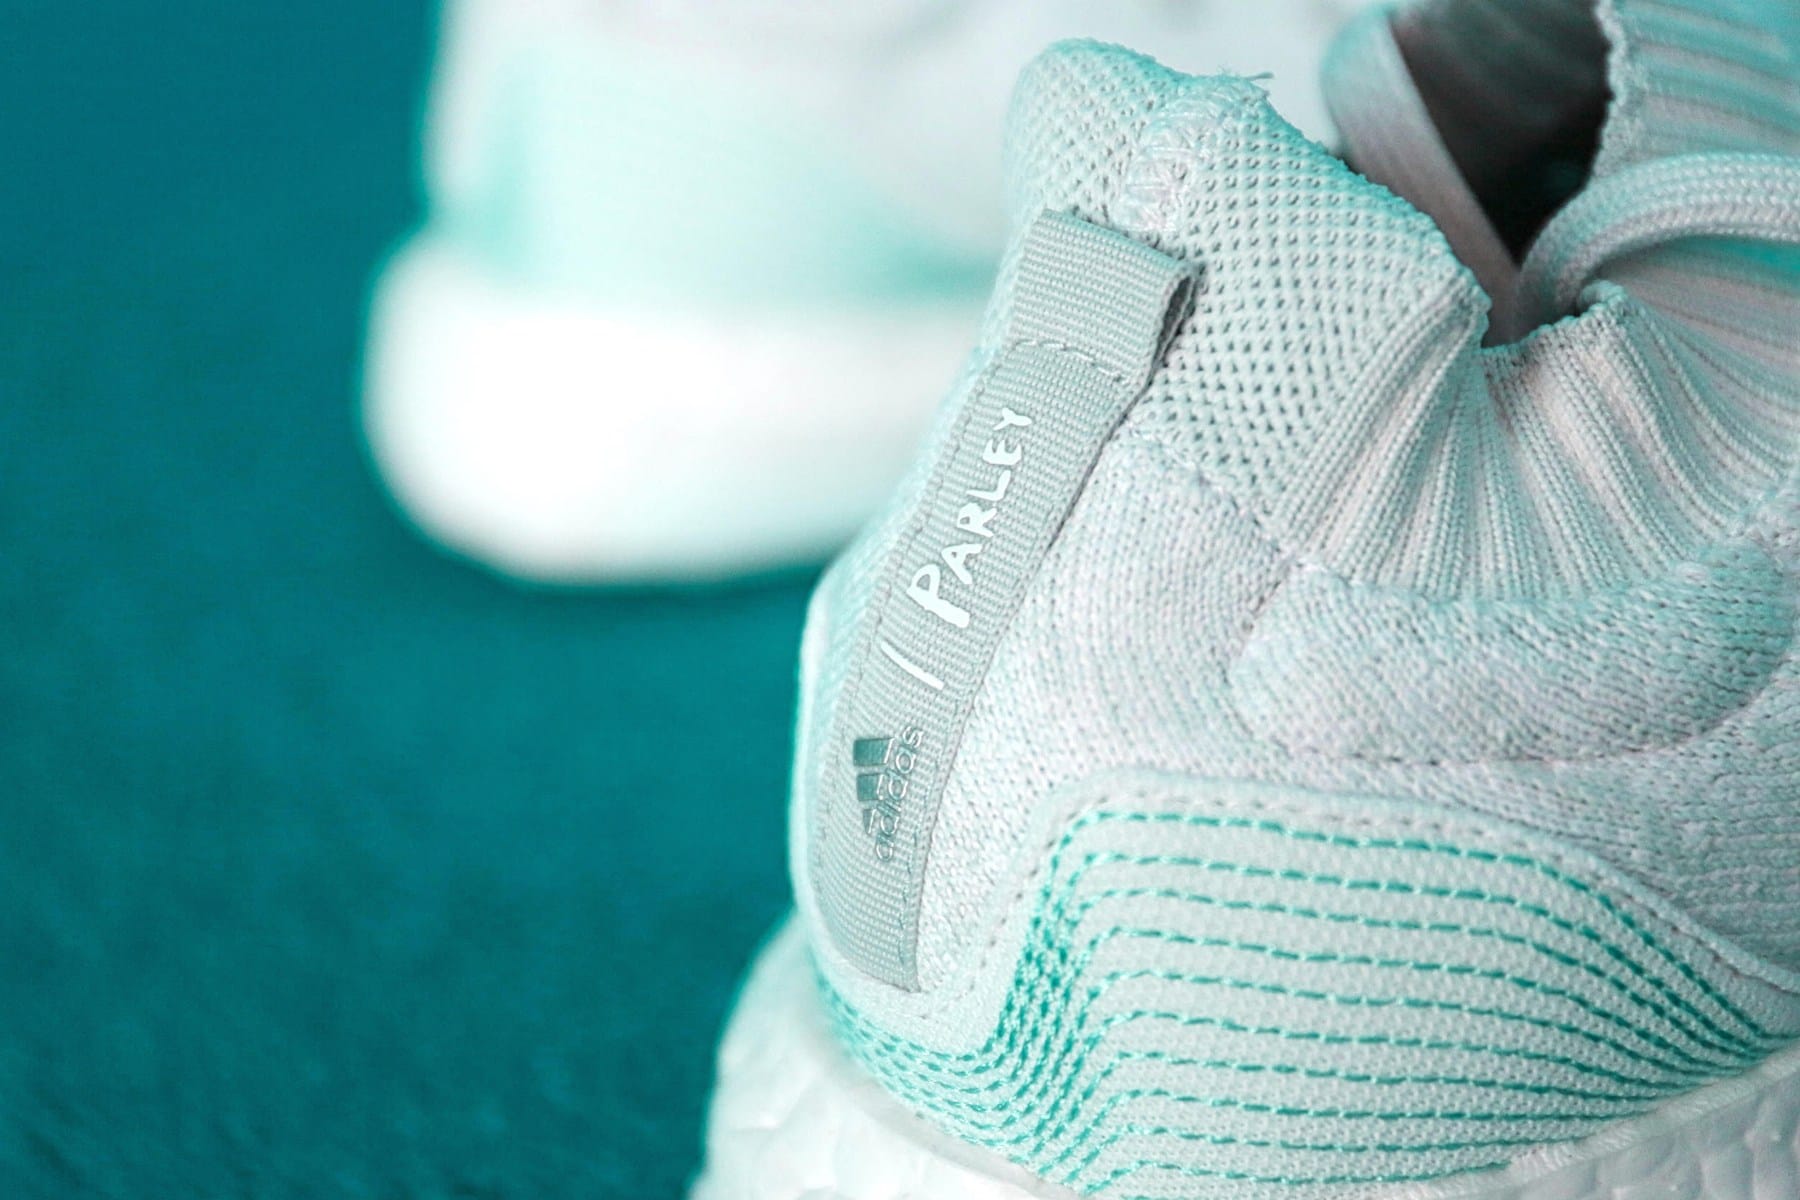 ultra boost uncaged with parley ocean plastictm